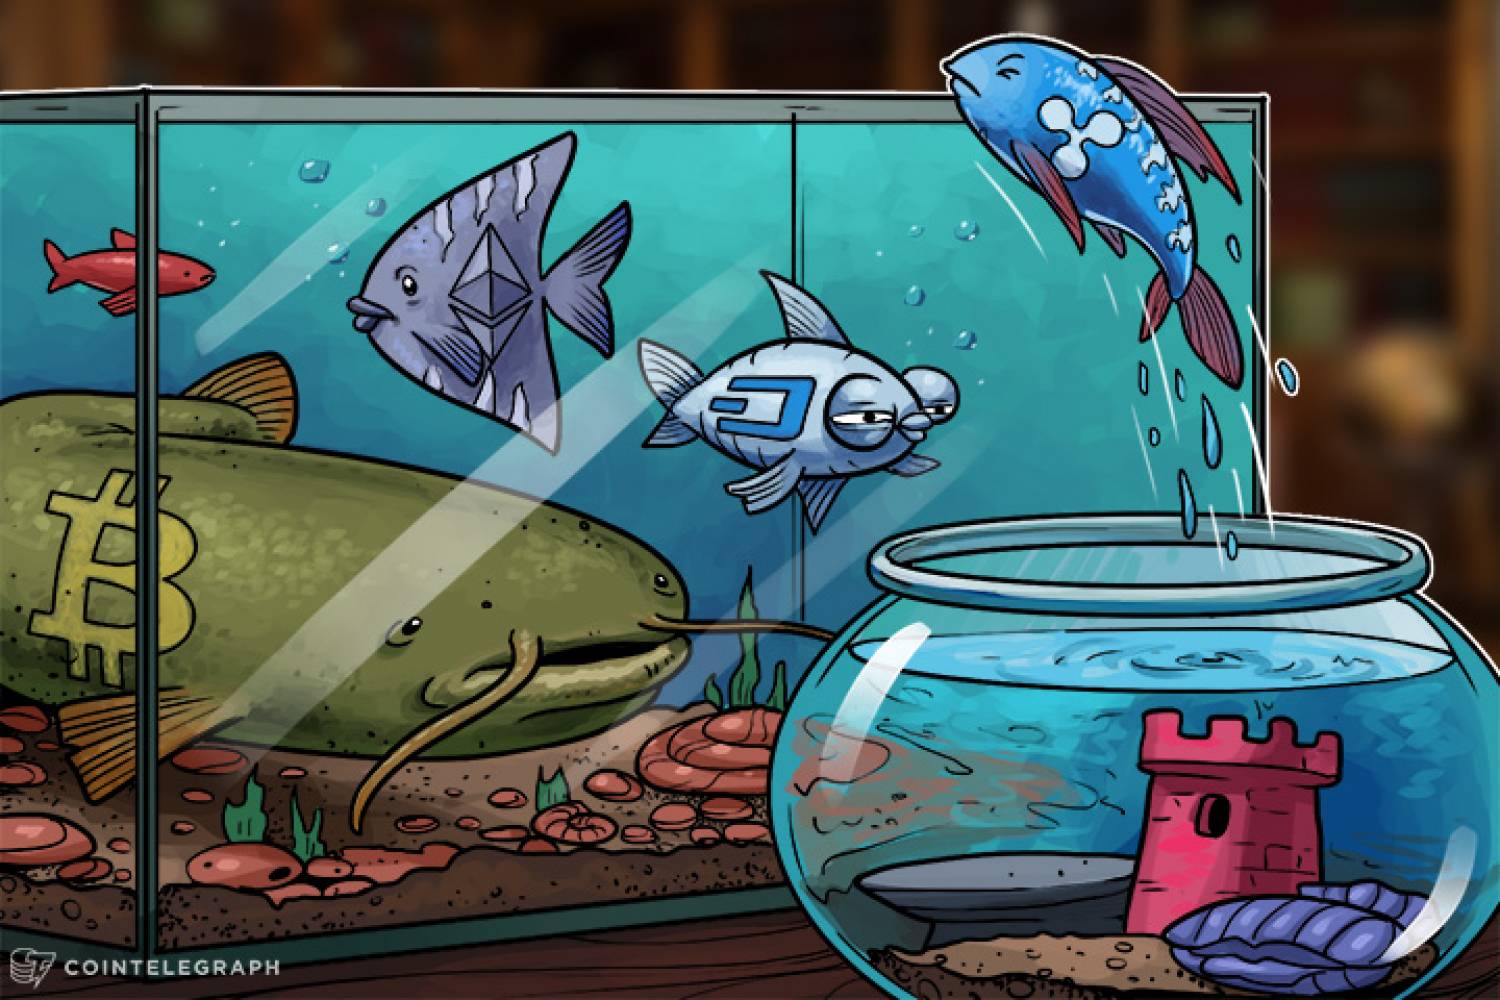 ryptocurrency market as a fish tank